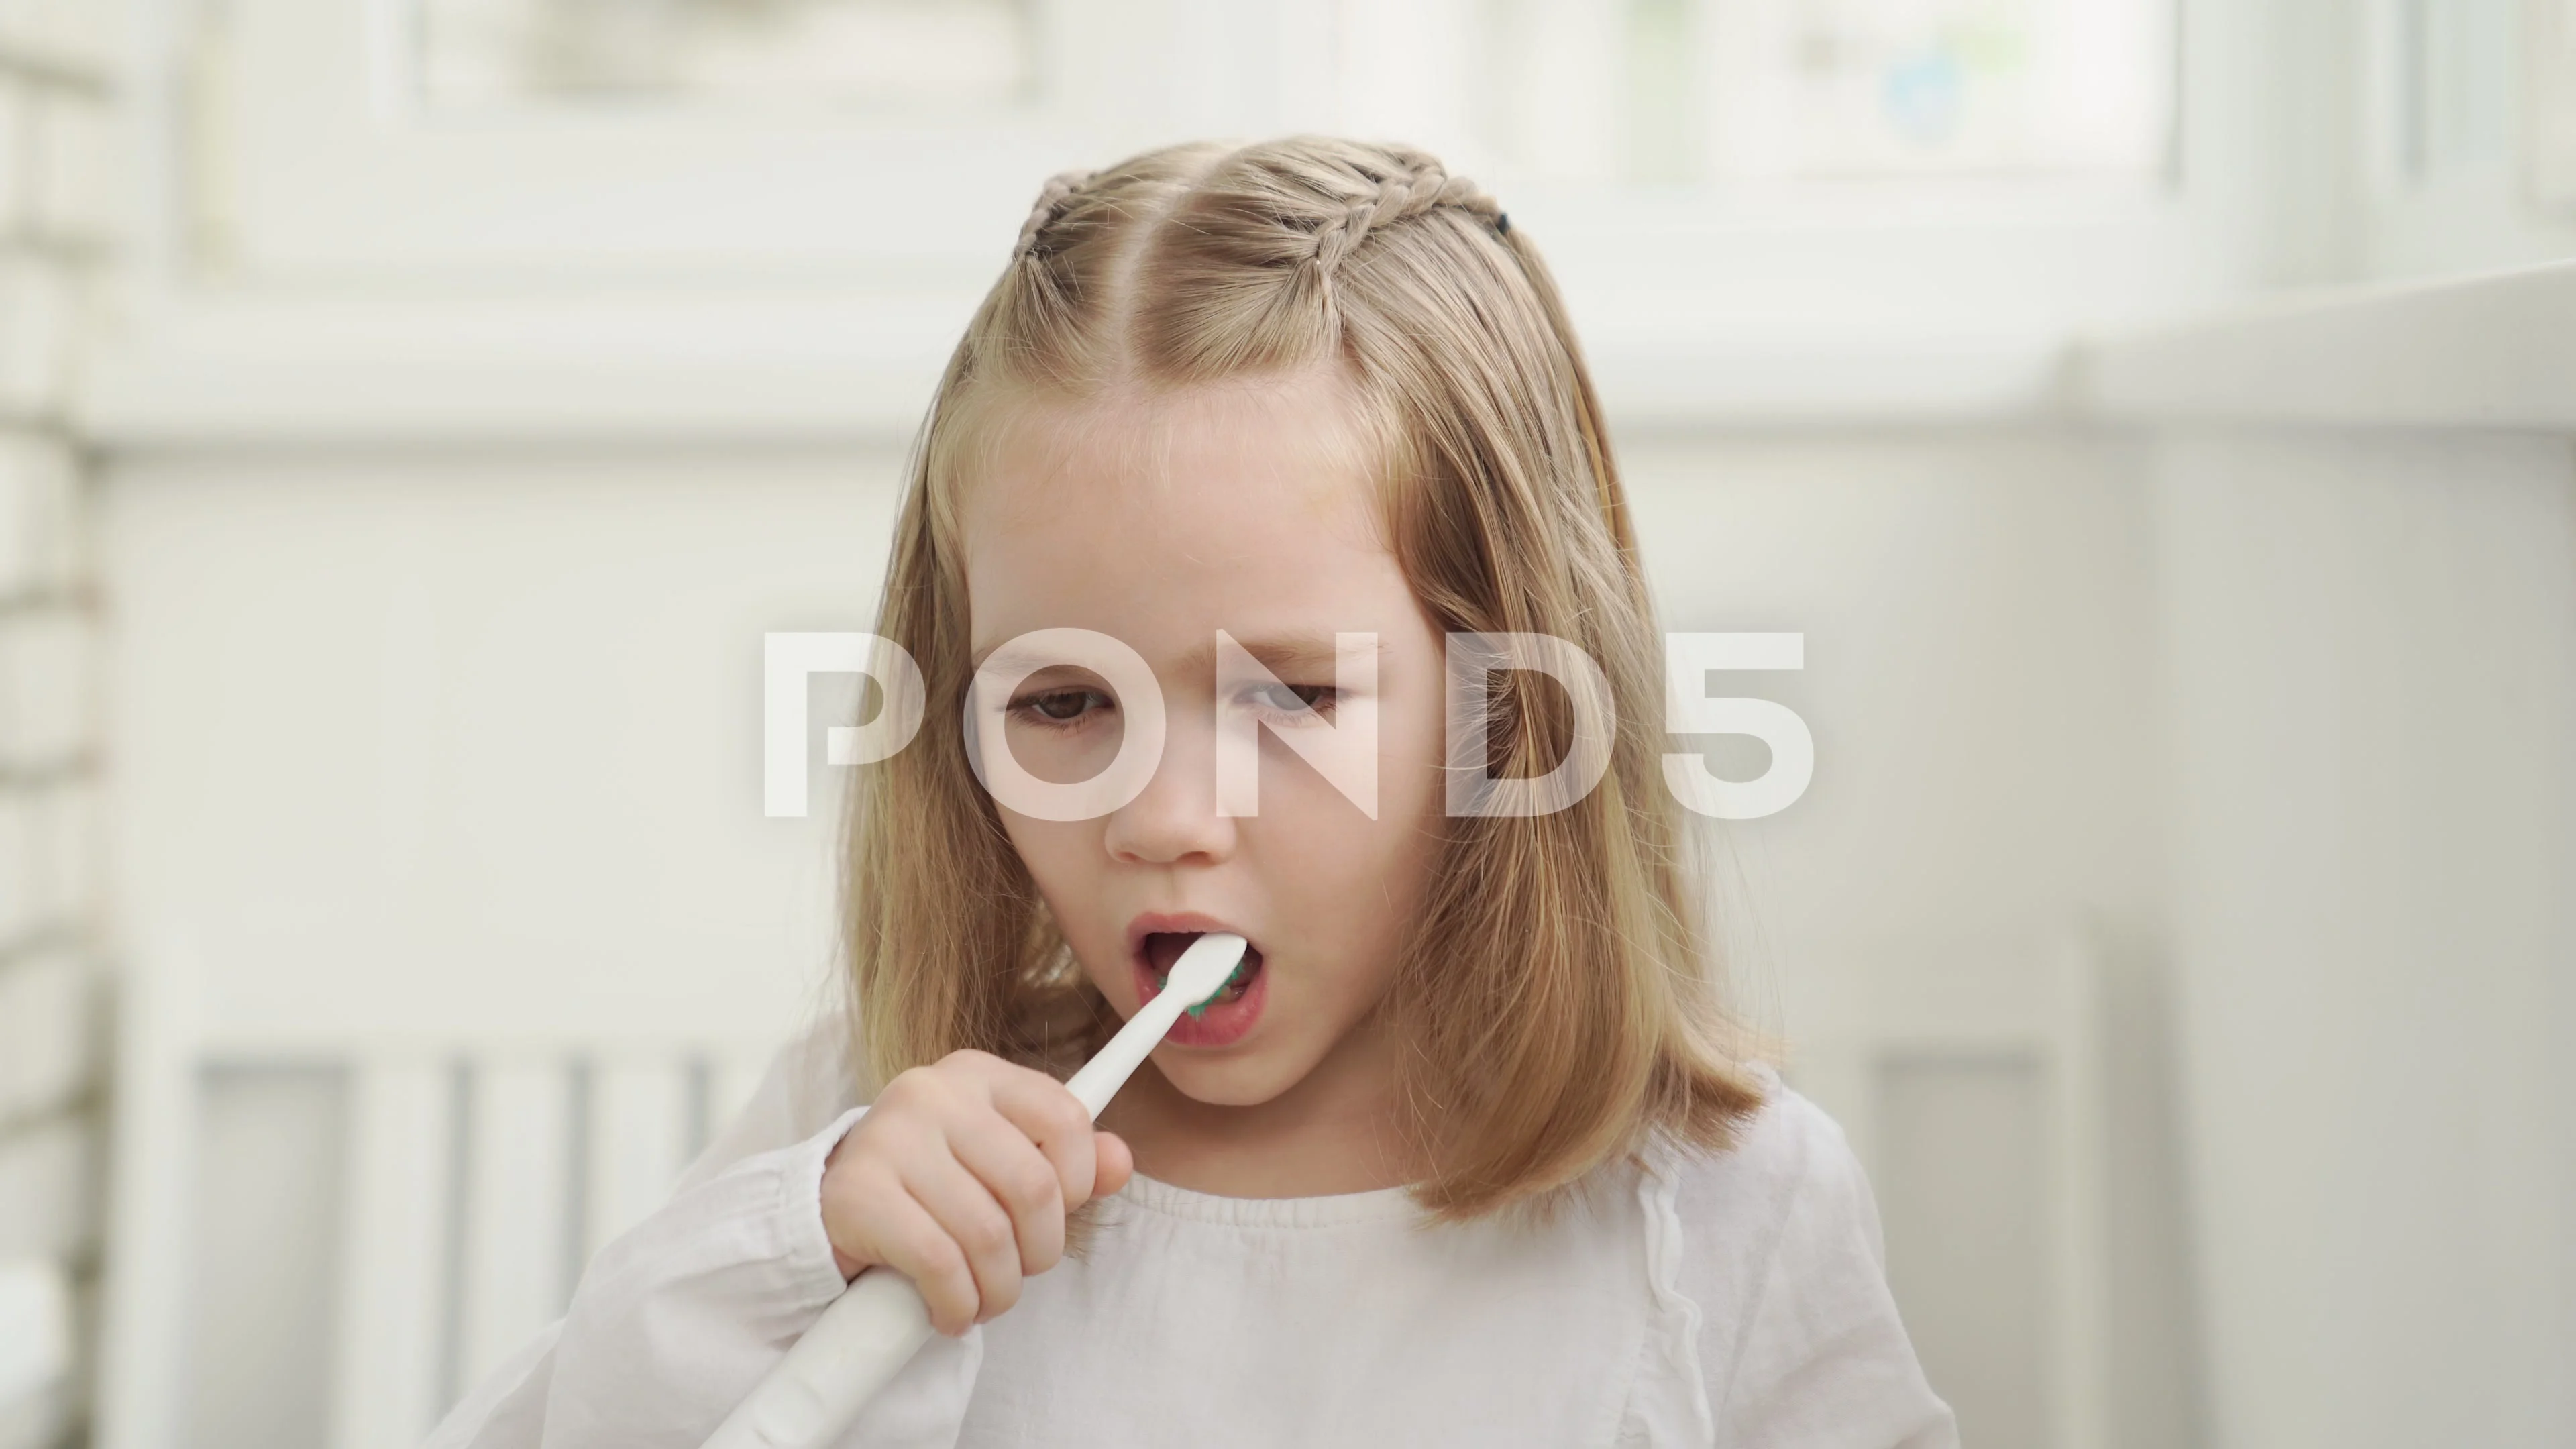 Young Girl With Electric Toothbrush